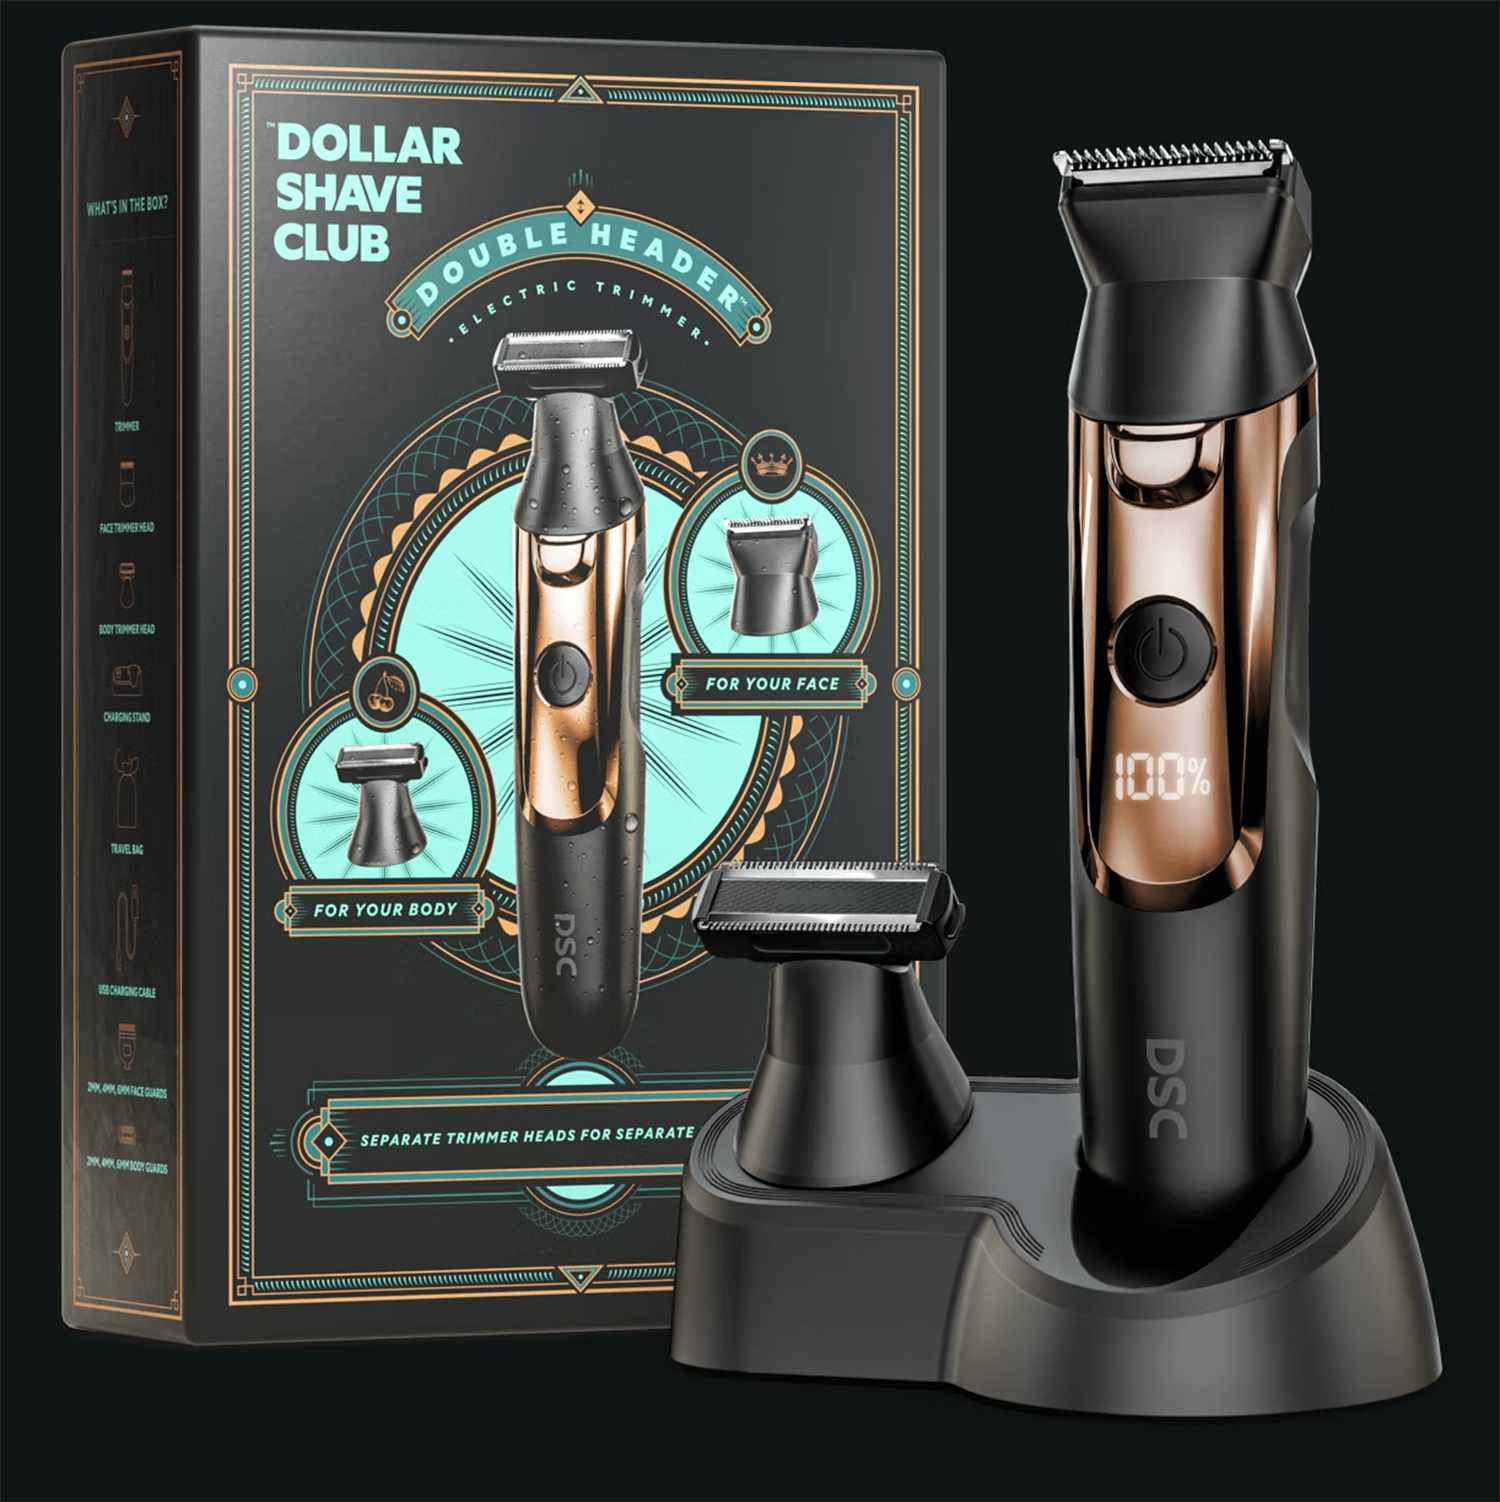 THE DOUBLE HEADER ELECTRIC TRIMMER